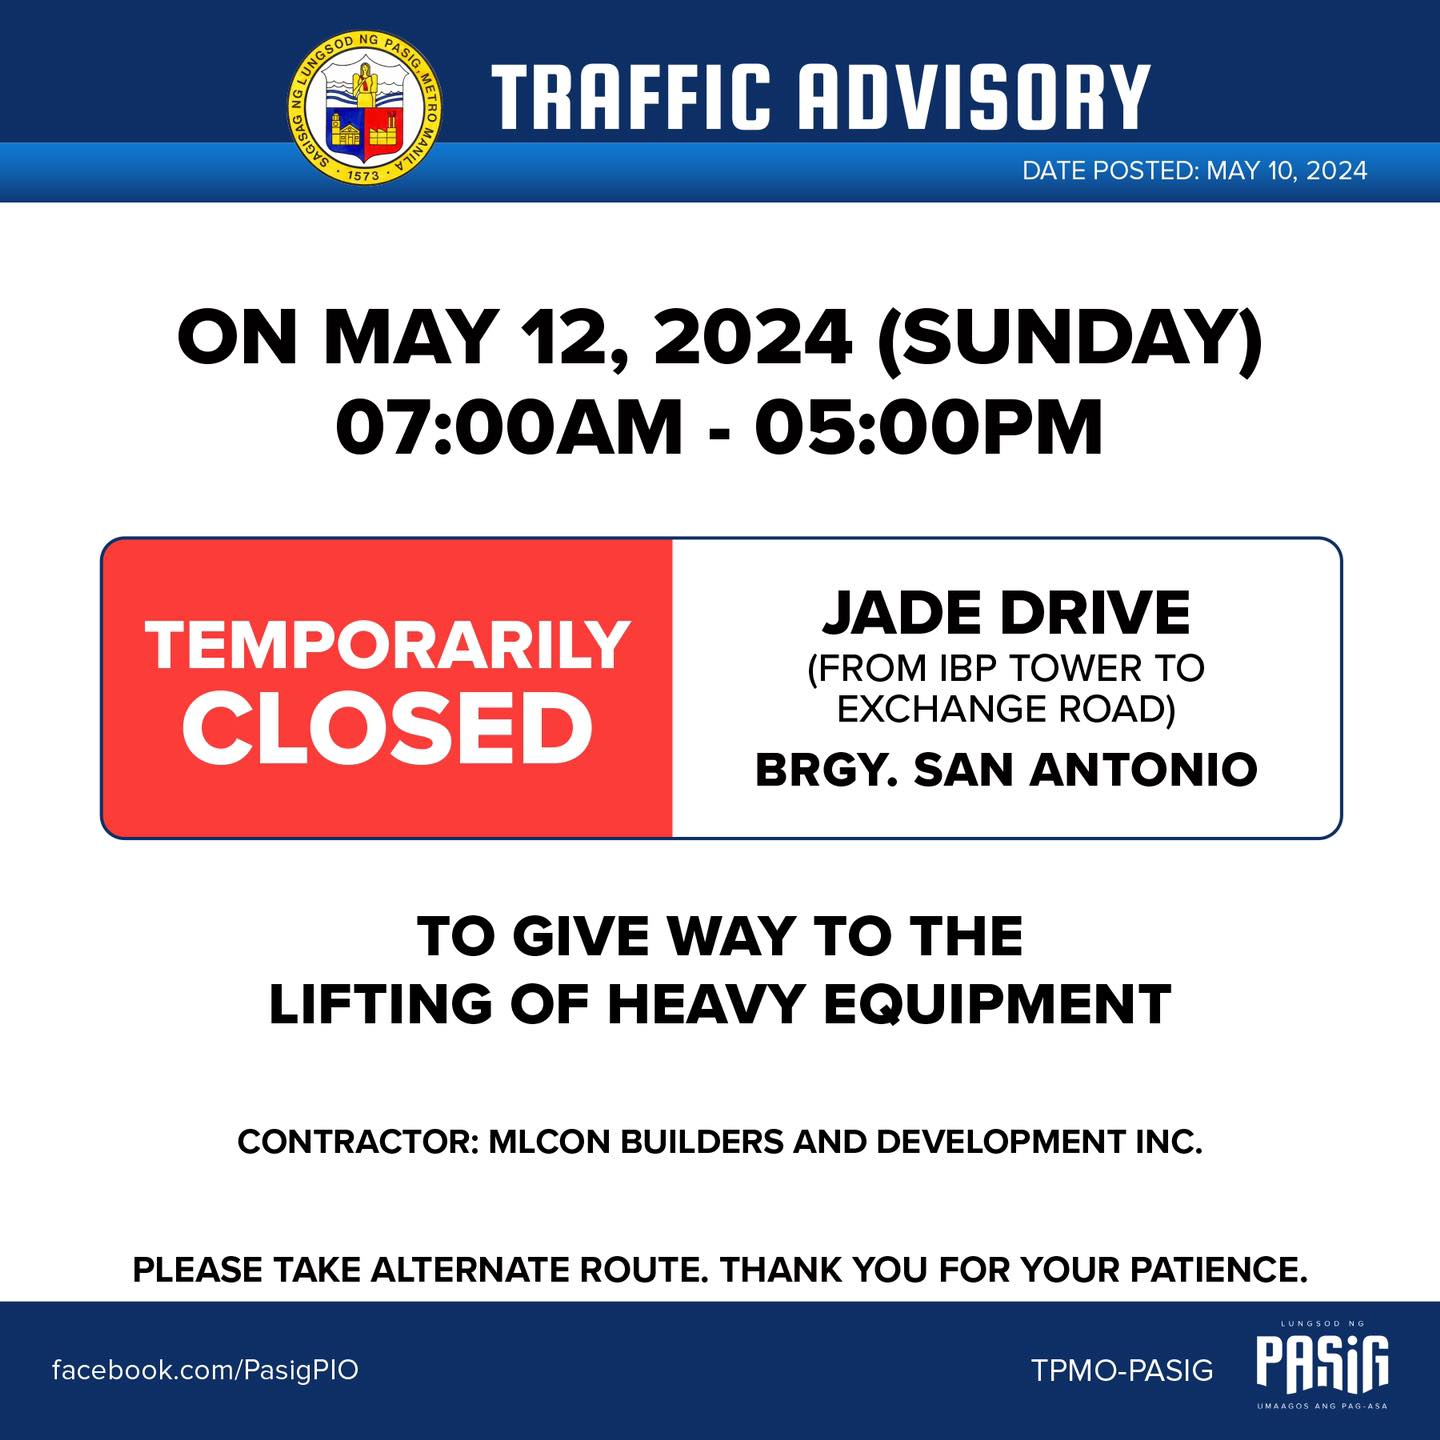 (Image from Pasig City Public Information Office)